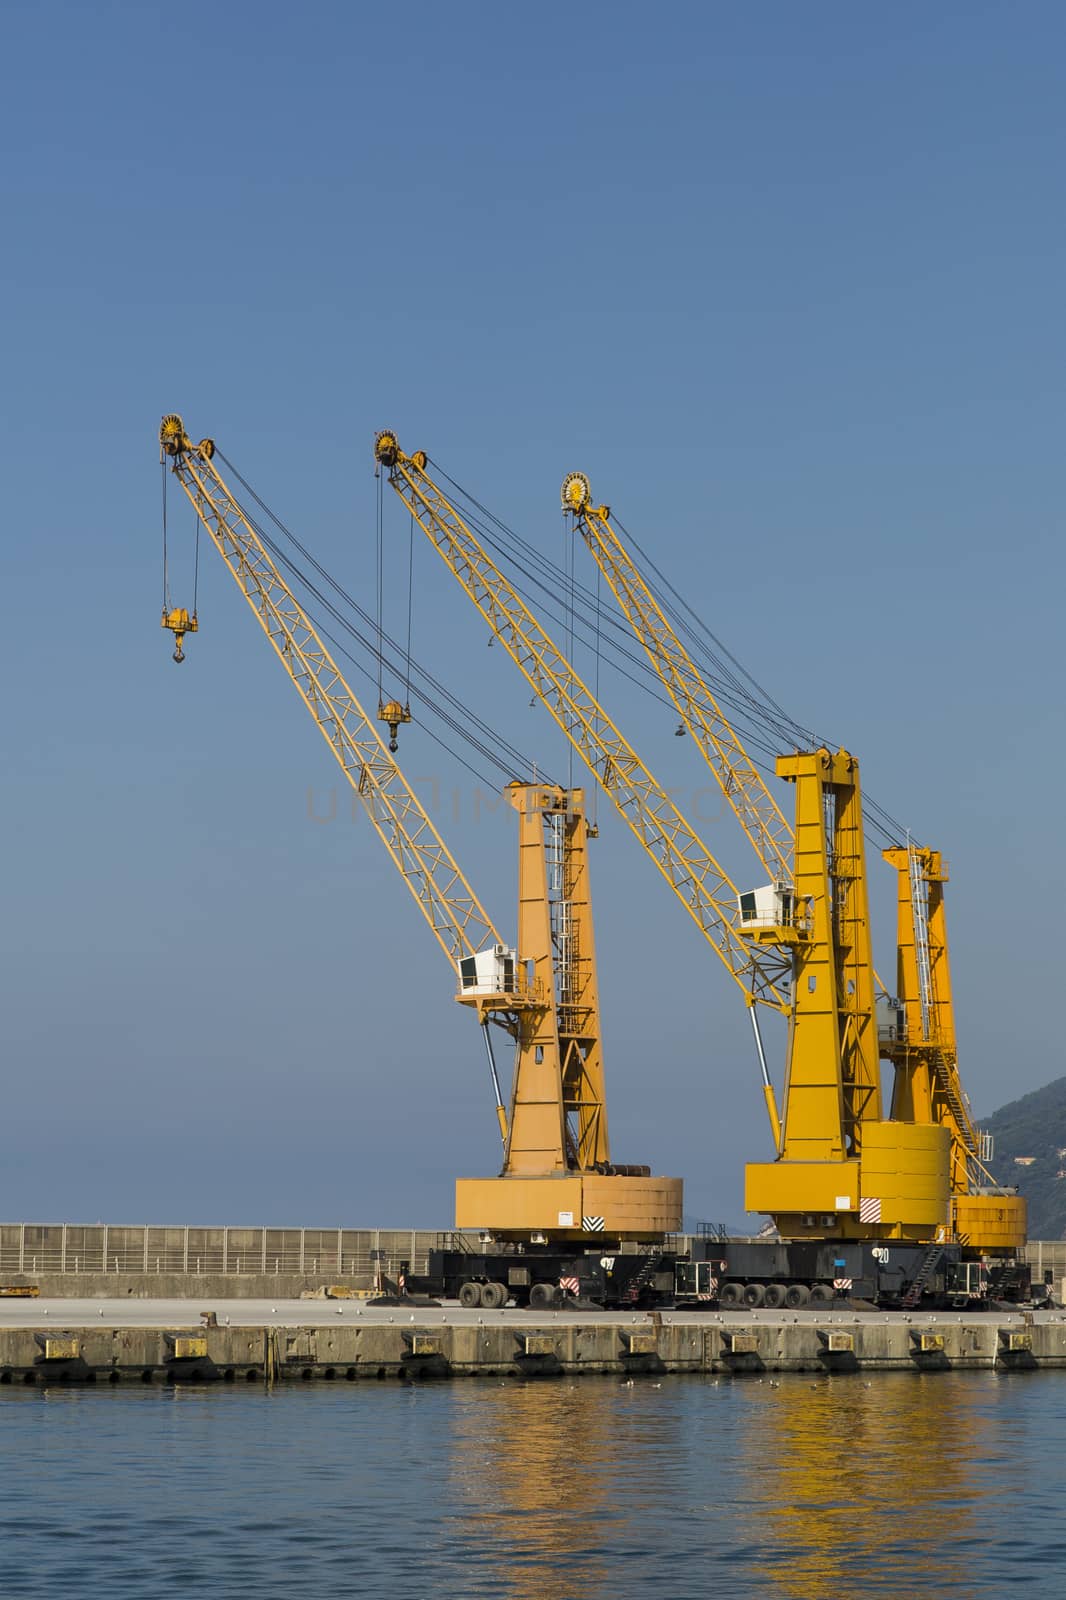 View of three cranes in a commerciial harbor